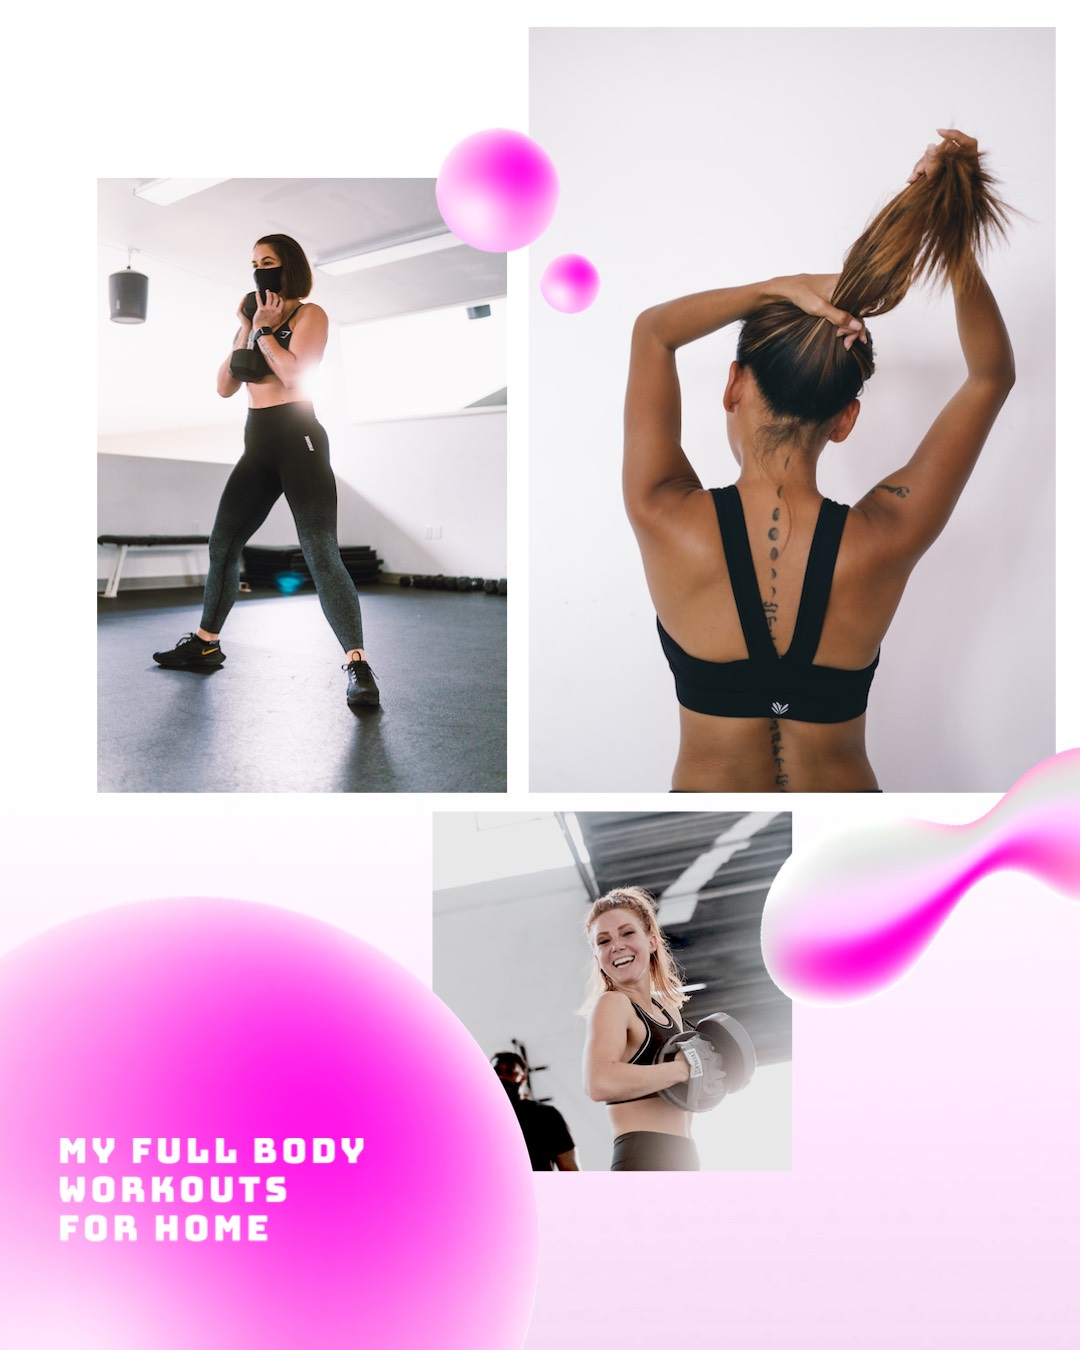 A Collage Of Photos Of A Woman Doing Exercises Sports Template